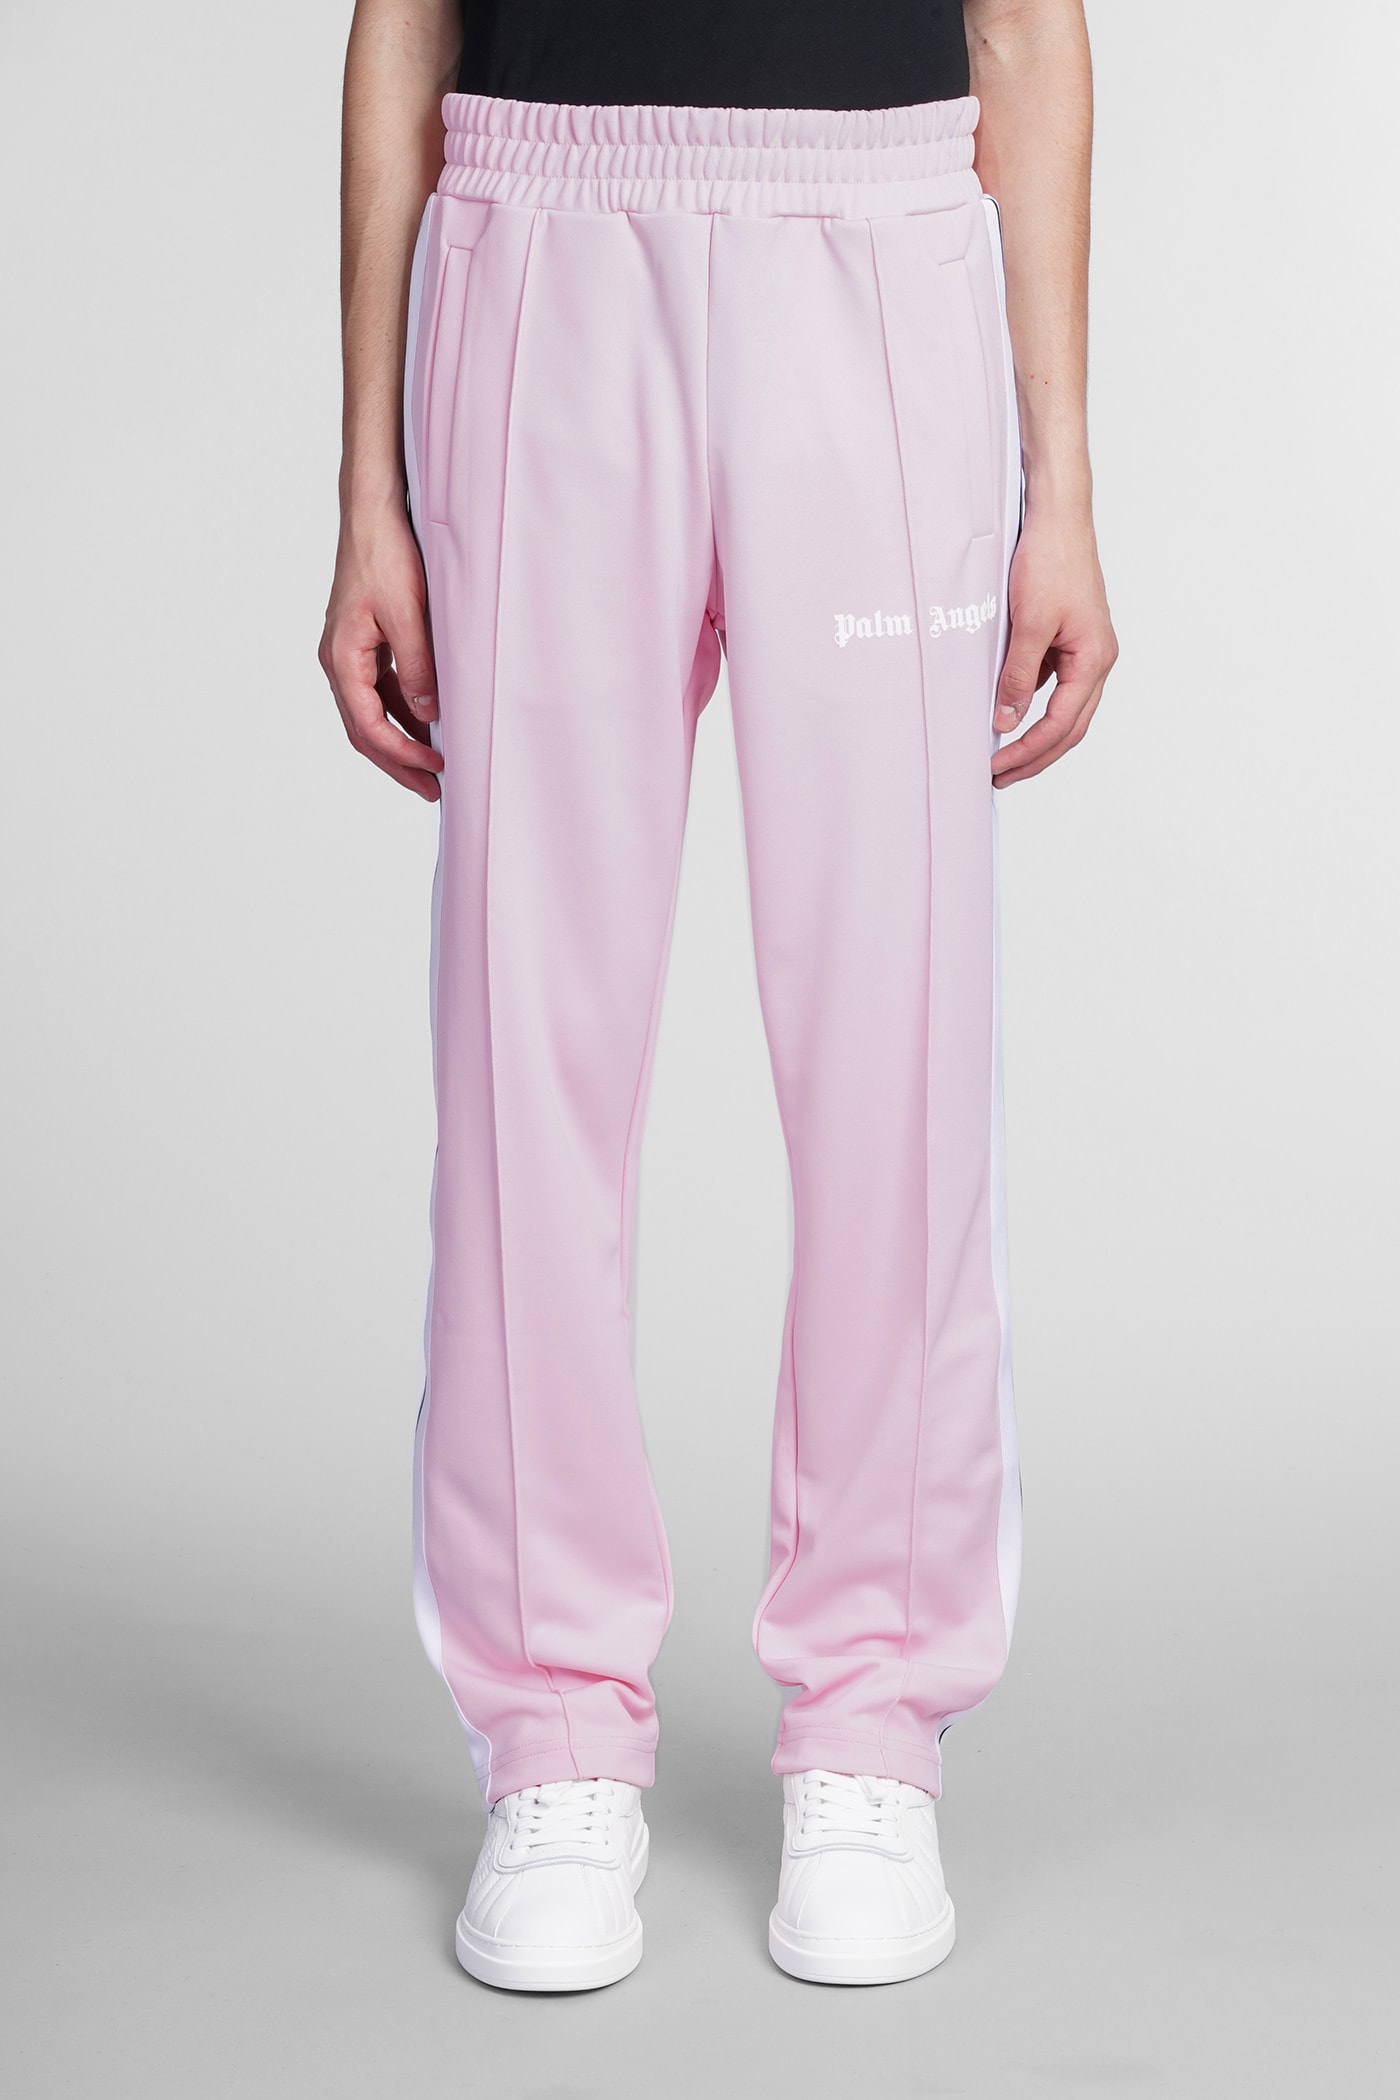 Palm Angels Pants In Rose-pink Polyester